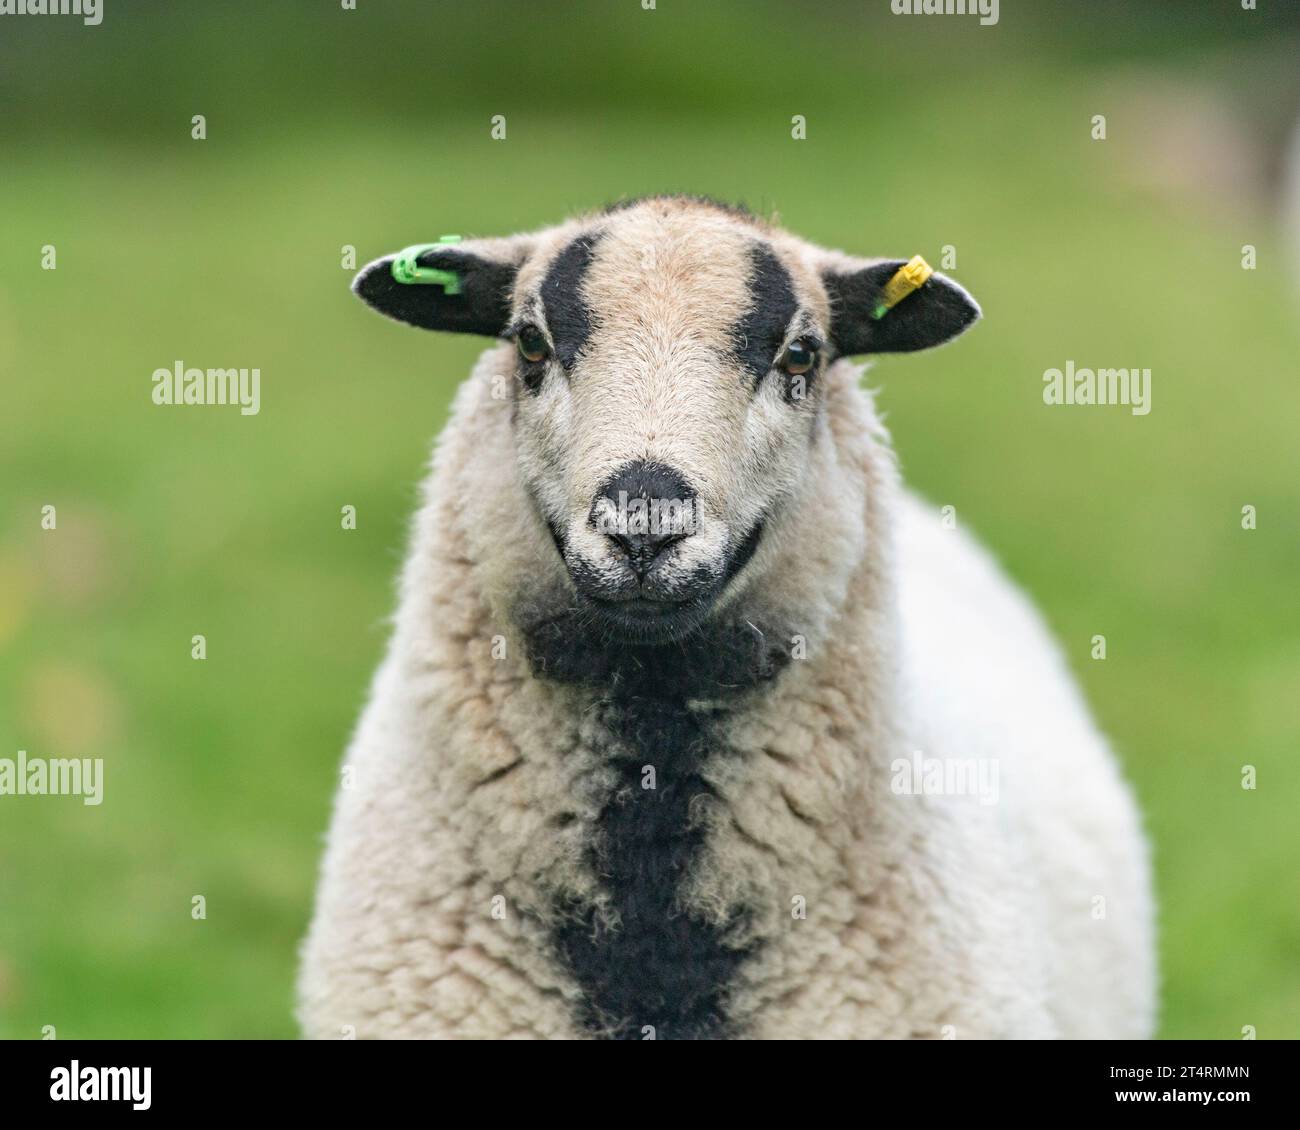 badger faced welsh mountain  sheep Stock Photo